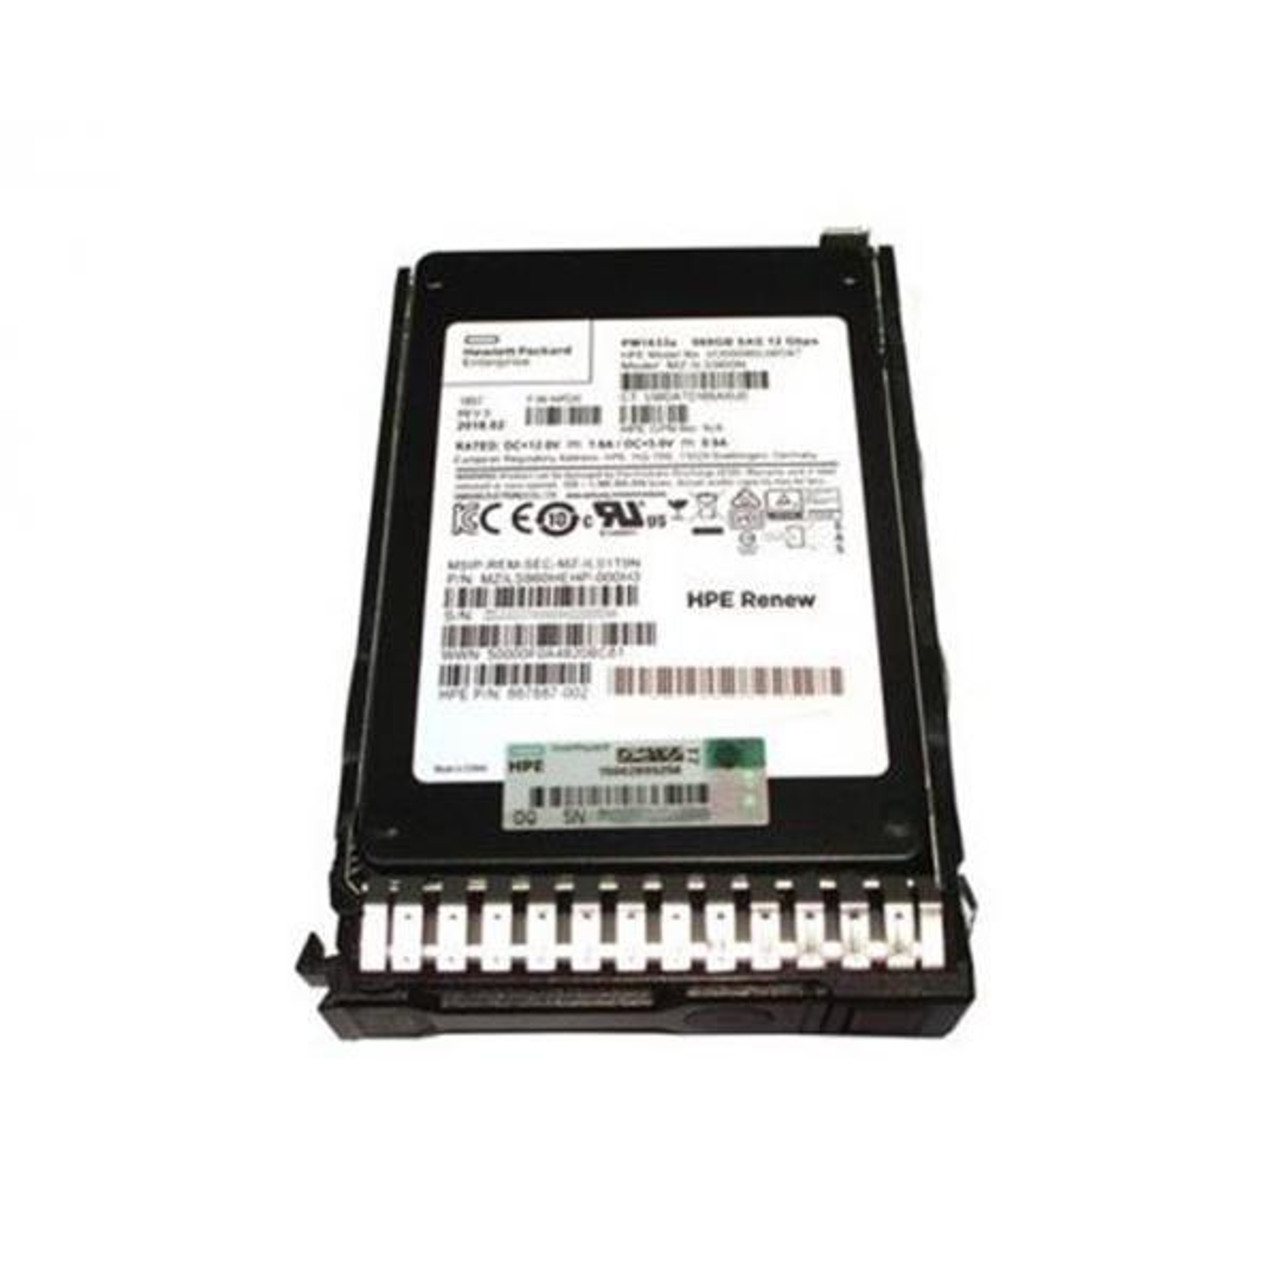 P10448-B21#0D1 HPE 960GB SAS 12Gbps Mixed Use 2.5-inch Internal Solid State Drive (SSD) with Smart Carrier